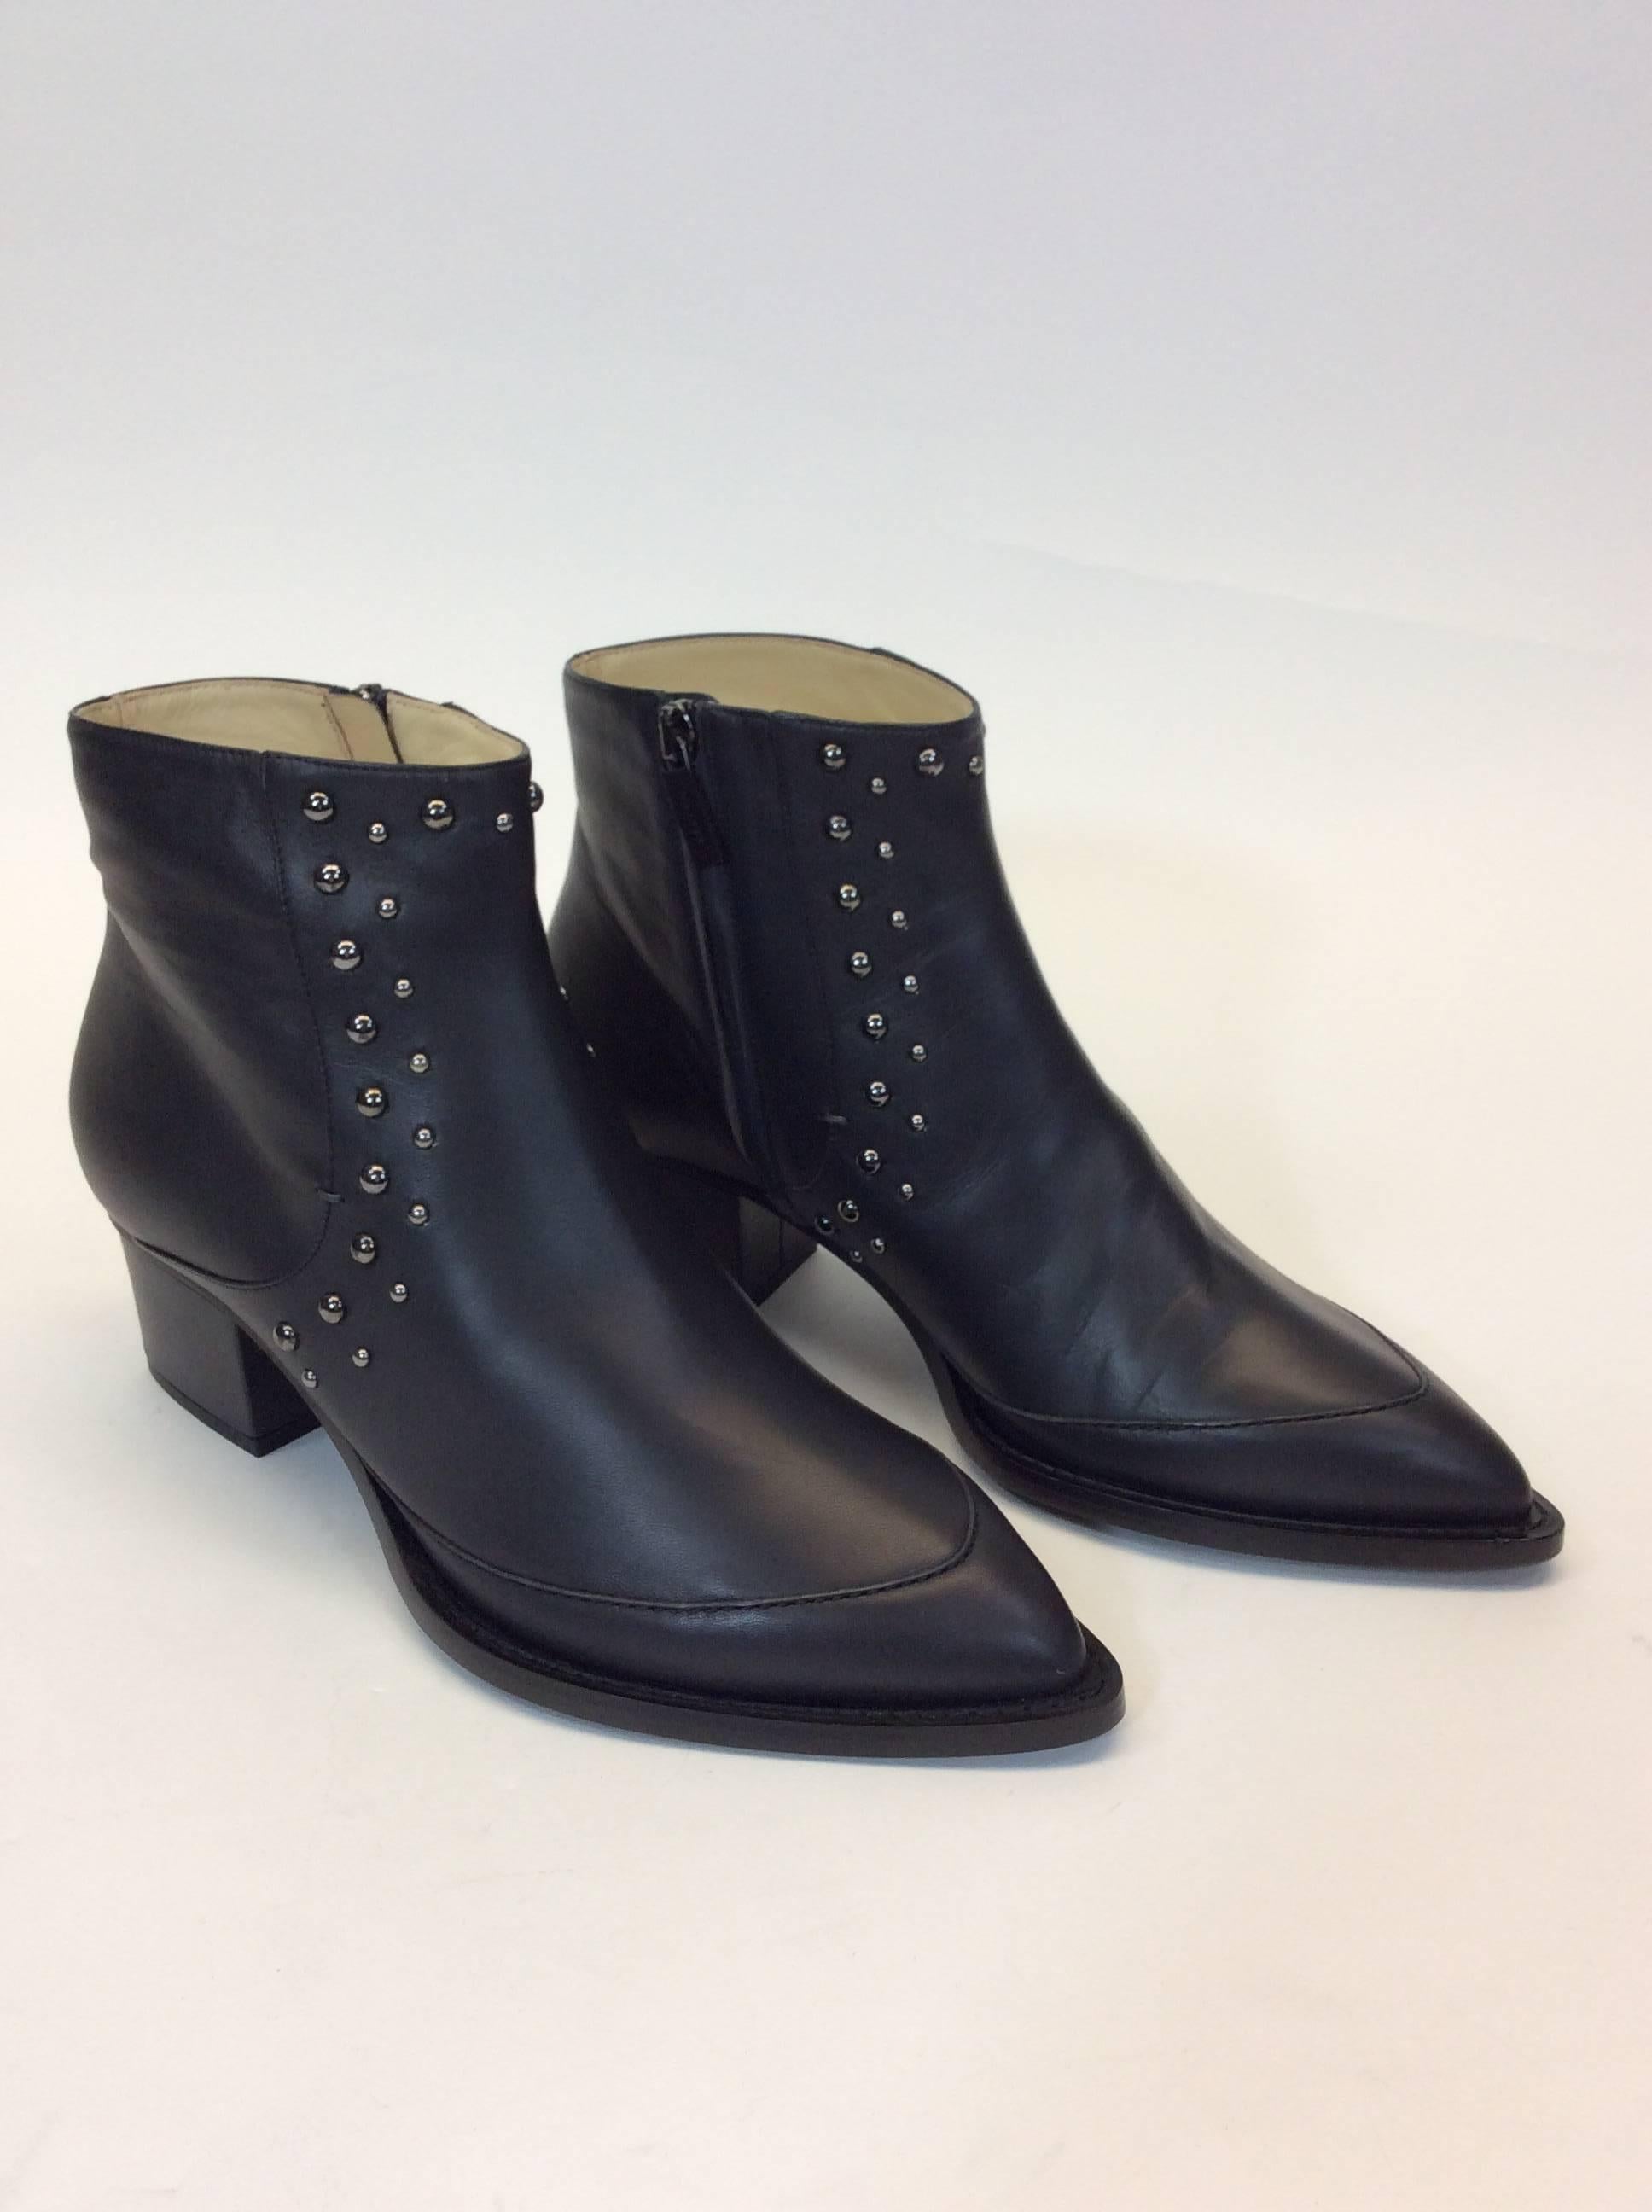 Maiyet Black Studded Leather Ankle Bootie  In New Condition For Sale In Narberth, PA